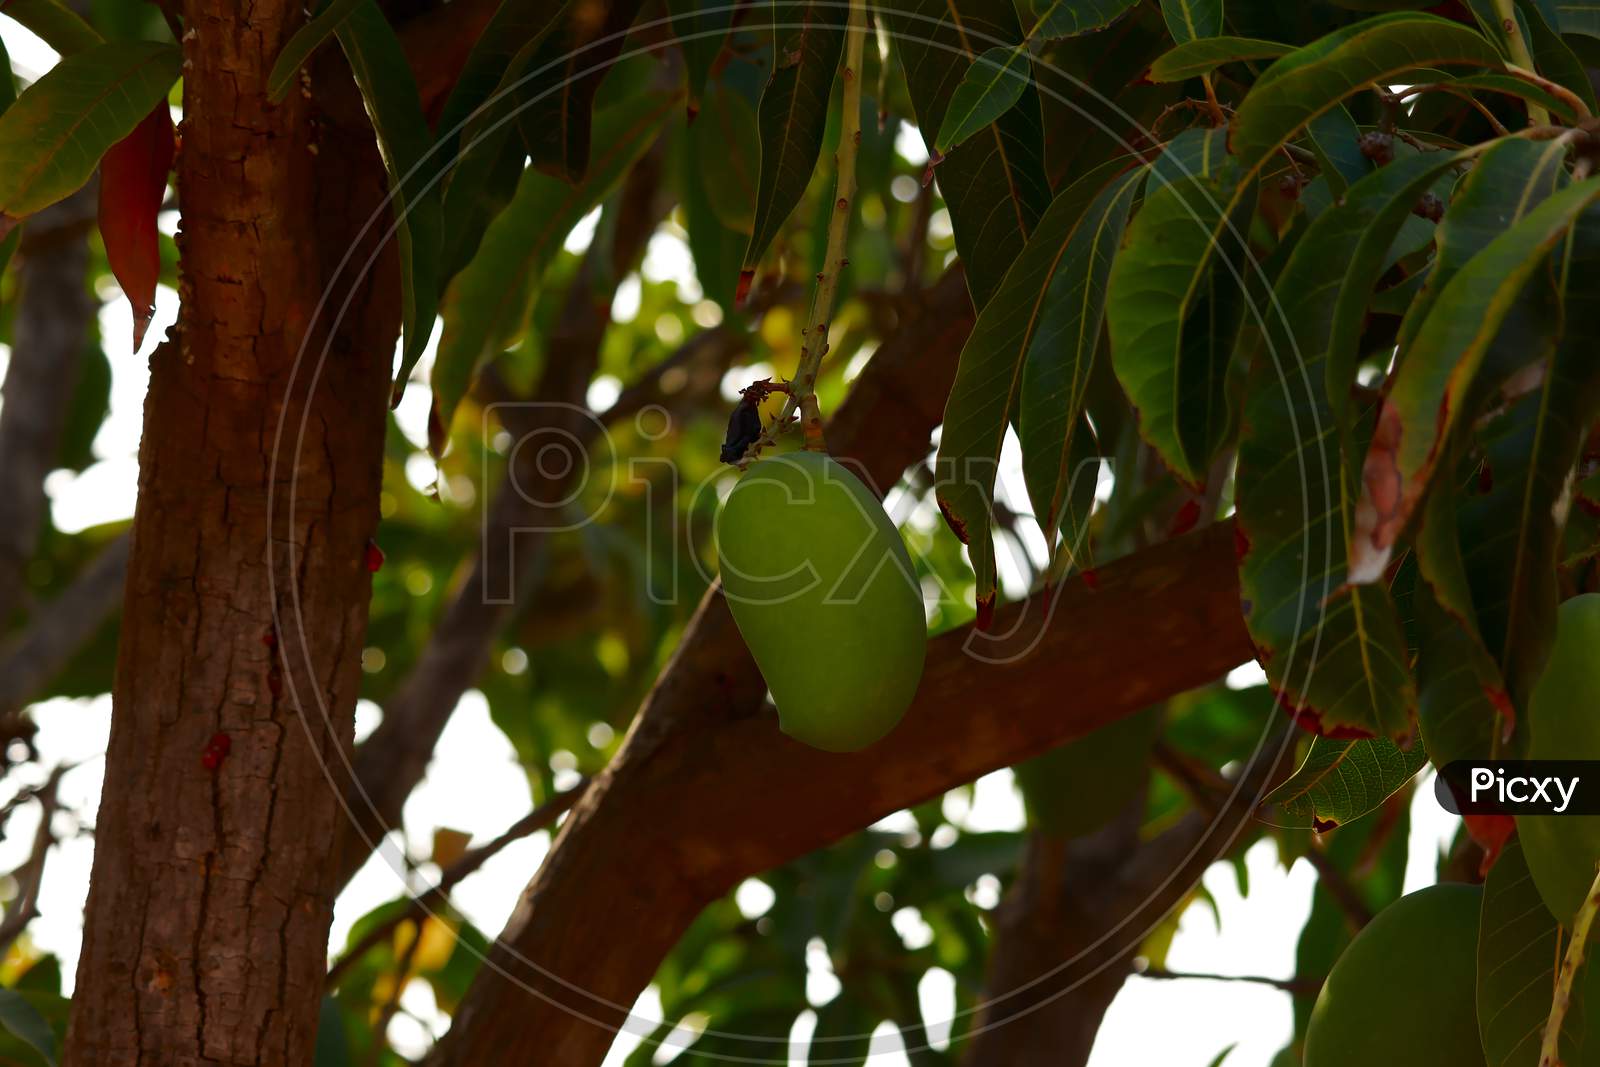 Mangoes On Branch And Green Leaf,Mango On Tree,Unripe Mangoes On Tree,Bunch Of Fresh Mangoes Hanging From Tree,Selective Focus